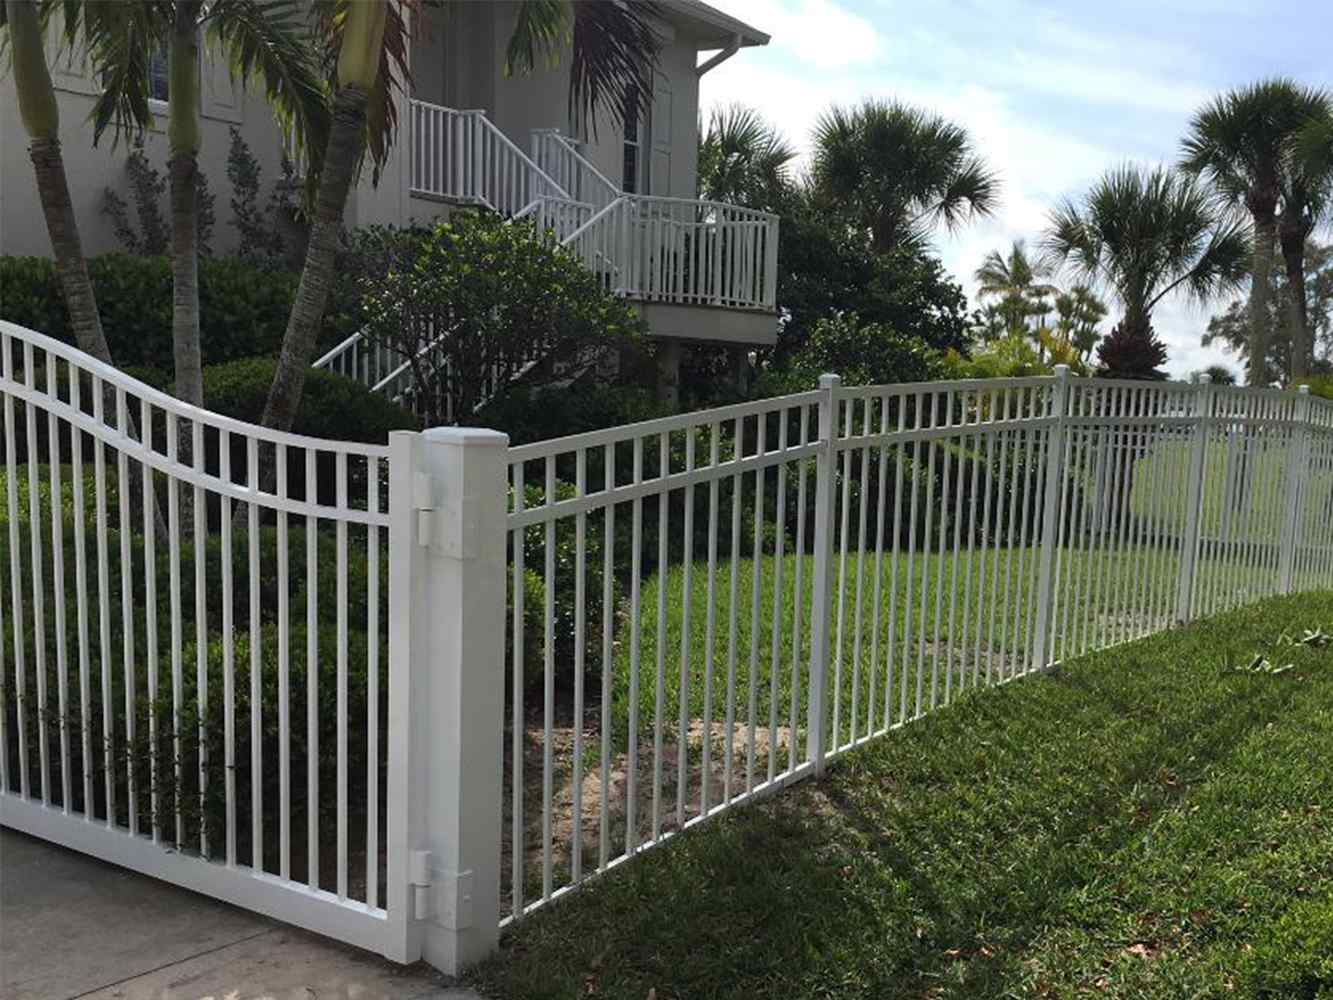 Photo of a residential aluminum fence in Sarasota, FL